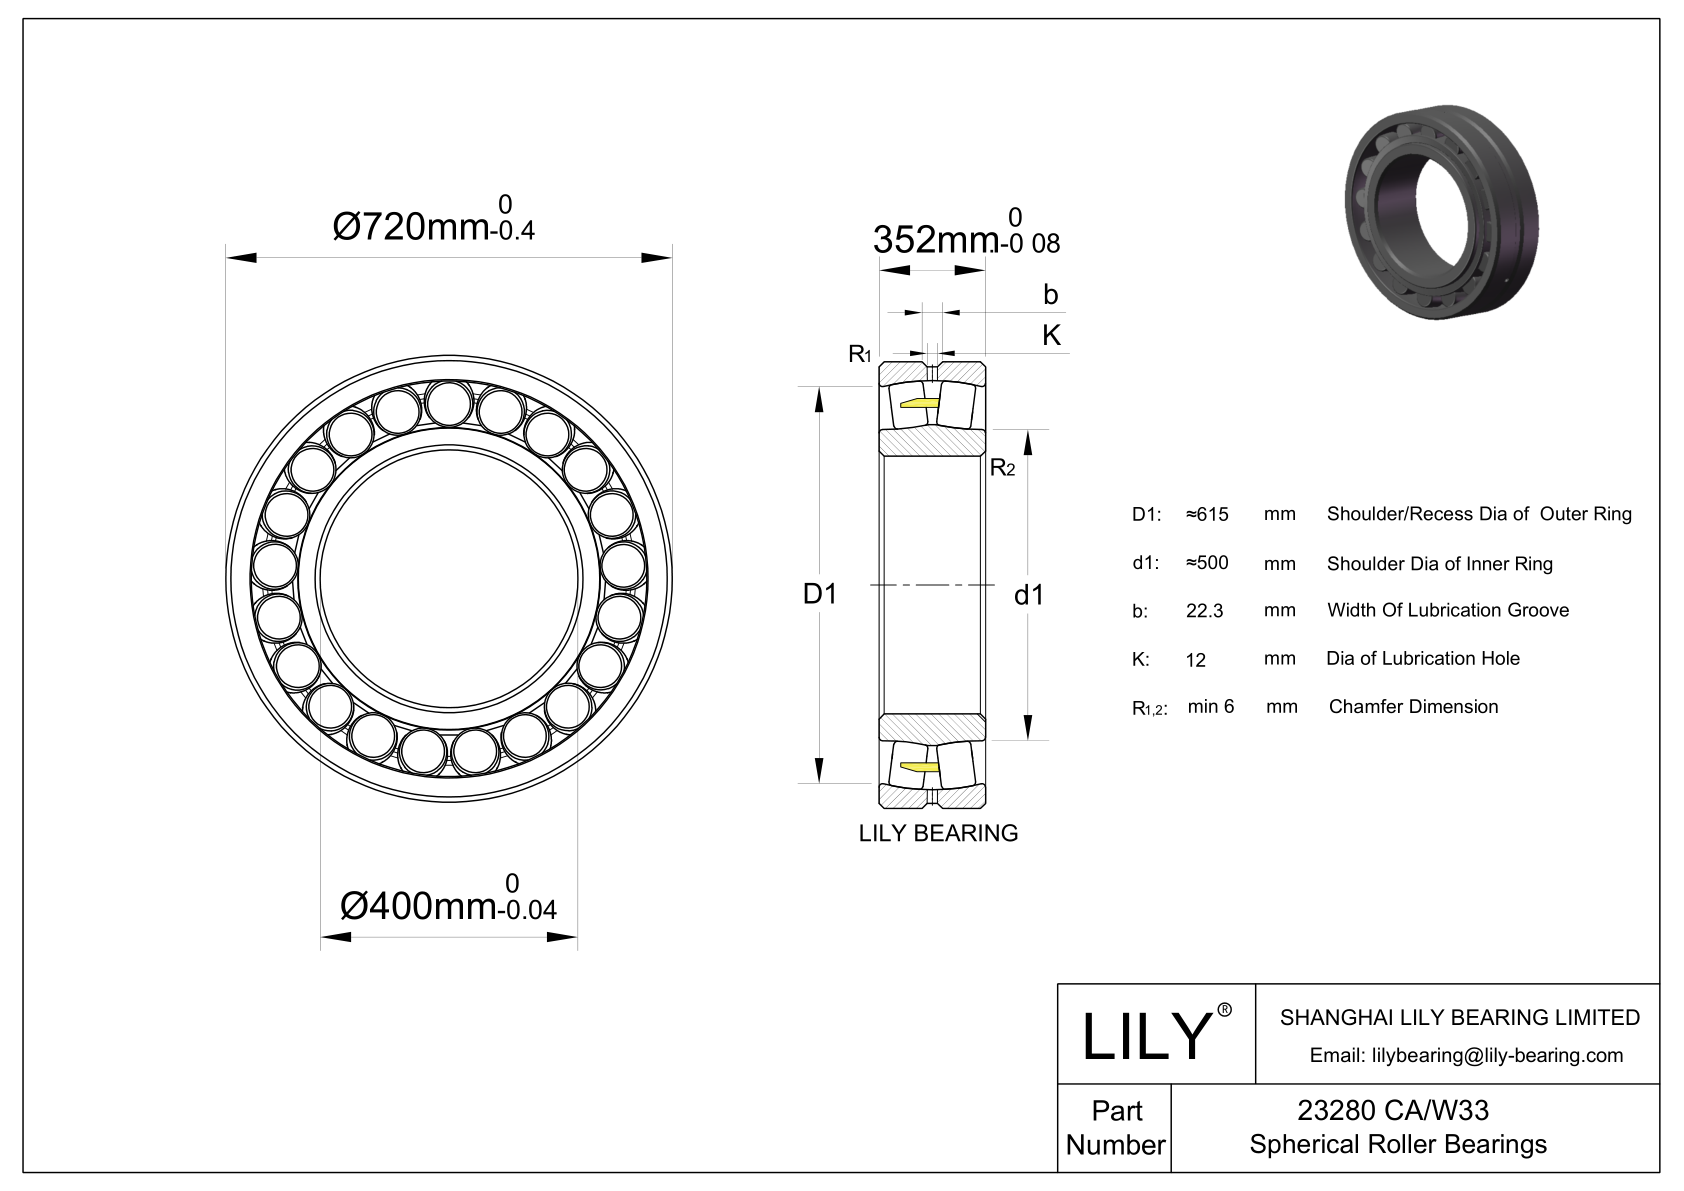 23280 CA/W33 Double Row Spherical Roller Bearing cad drawing